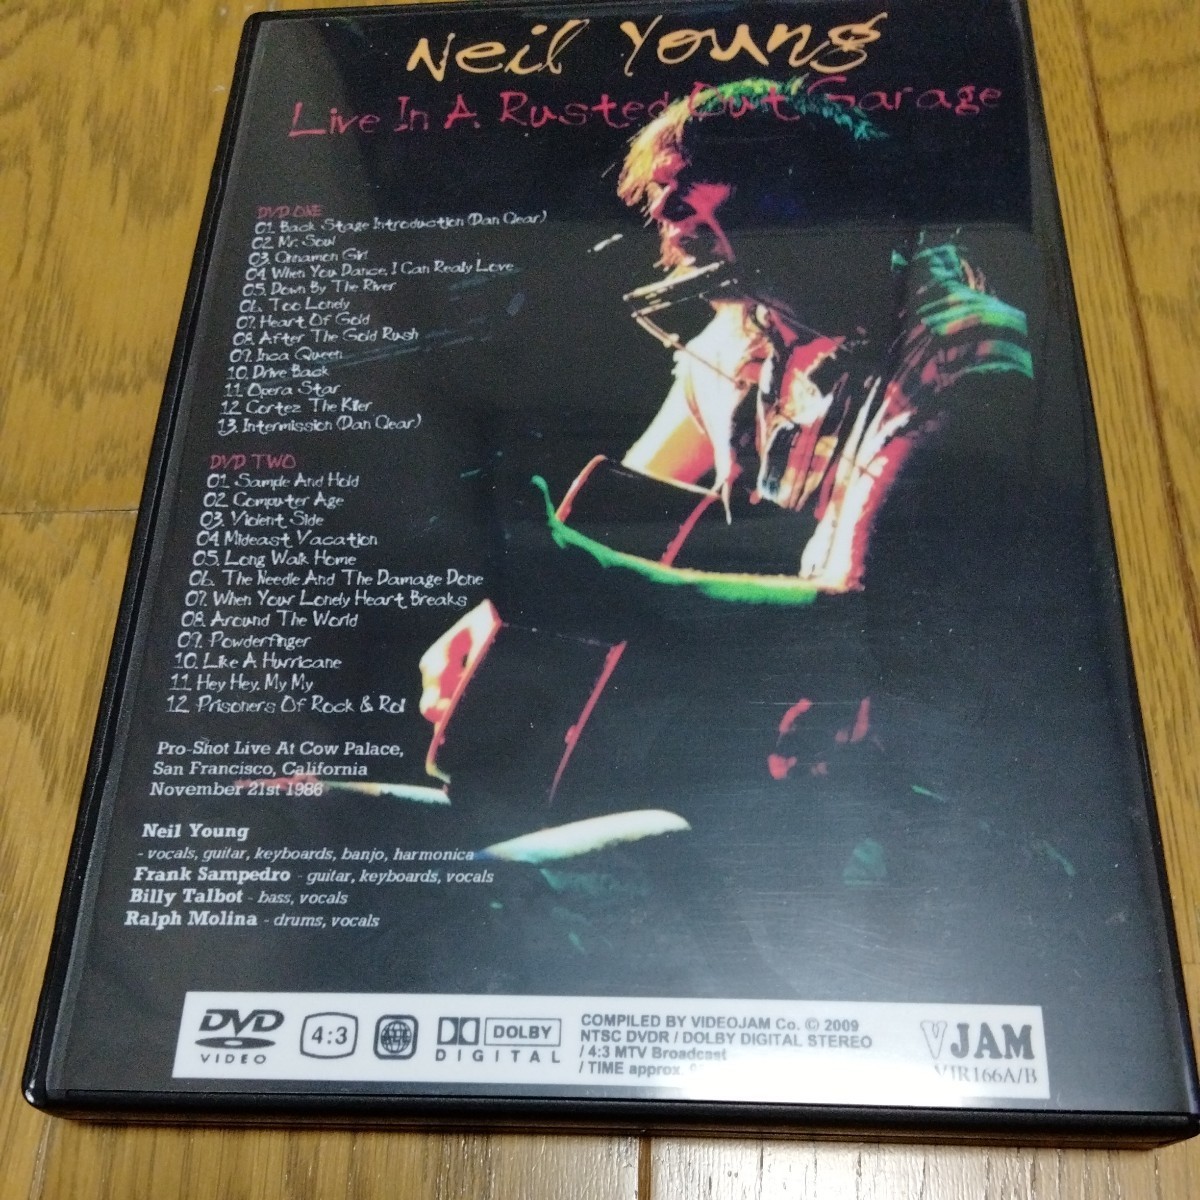  Neal Young DVD Neal * Young DVD